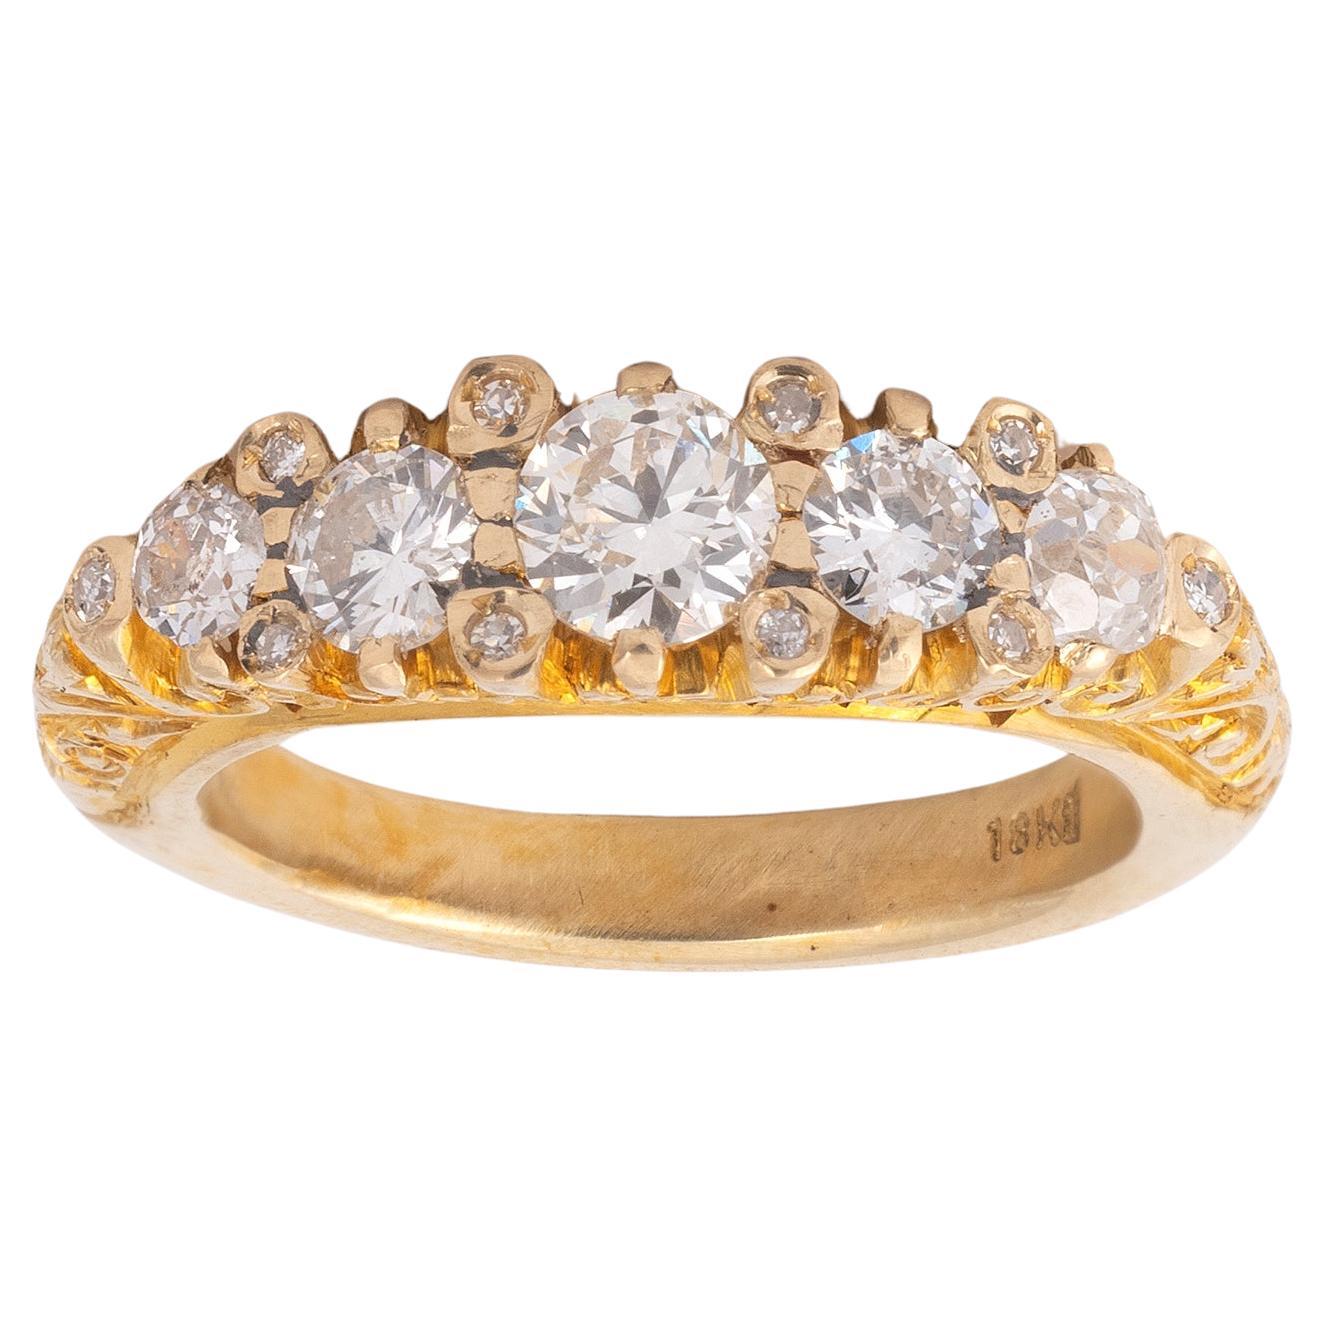 Old European Cut A Five-Stone Diamond Ring Early 20th Century For Sale